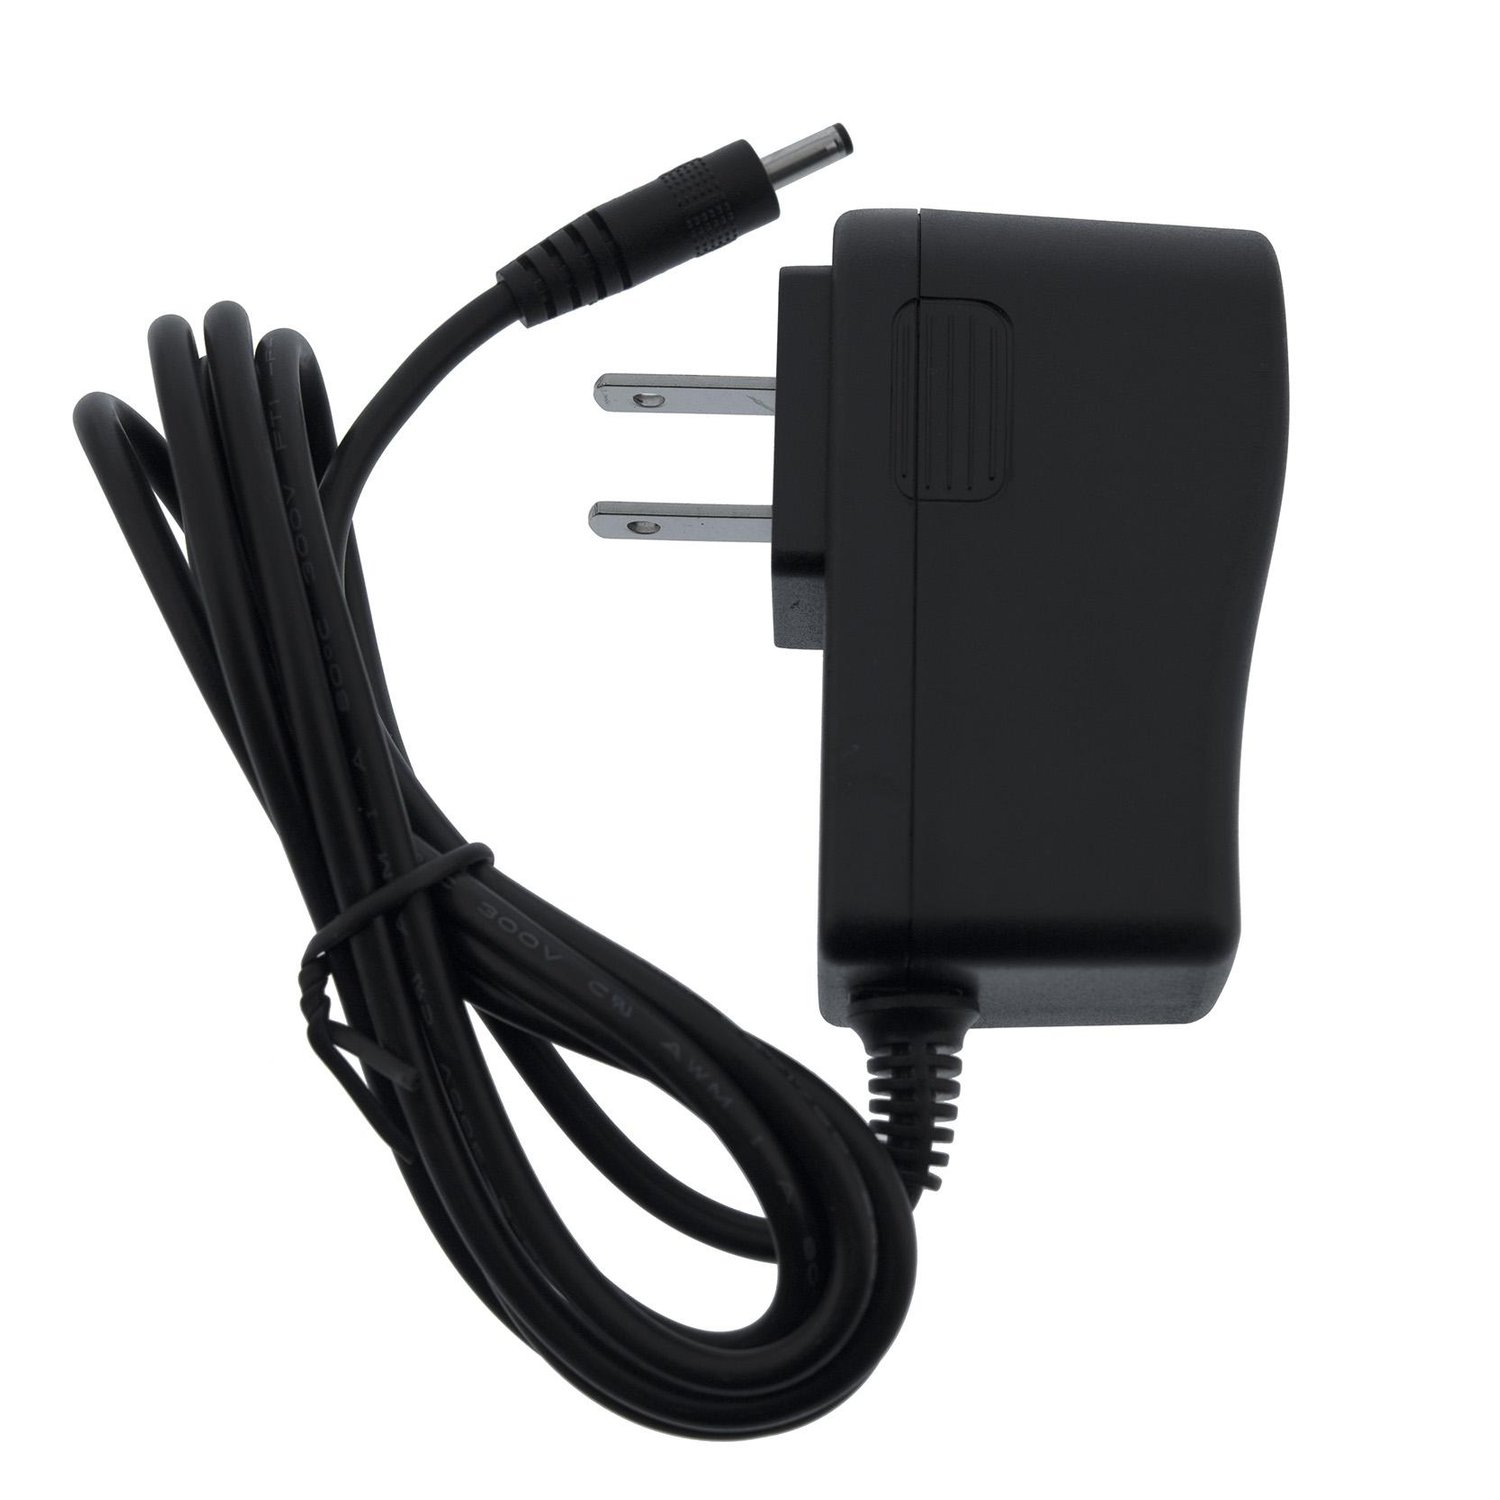 2.0Amp Barrel Style AC Power Adapter for Mercury On-The-Go